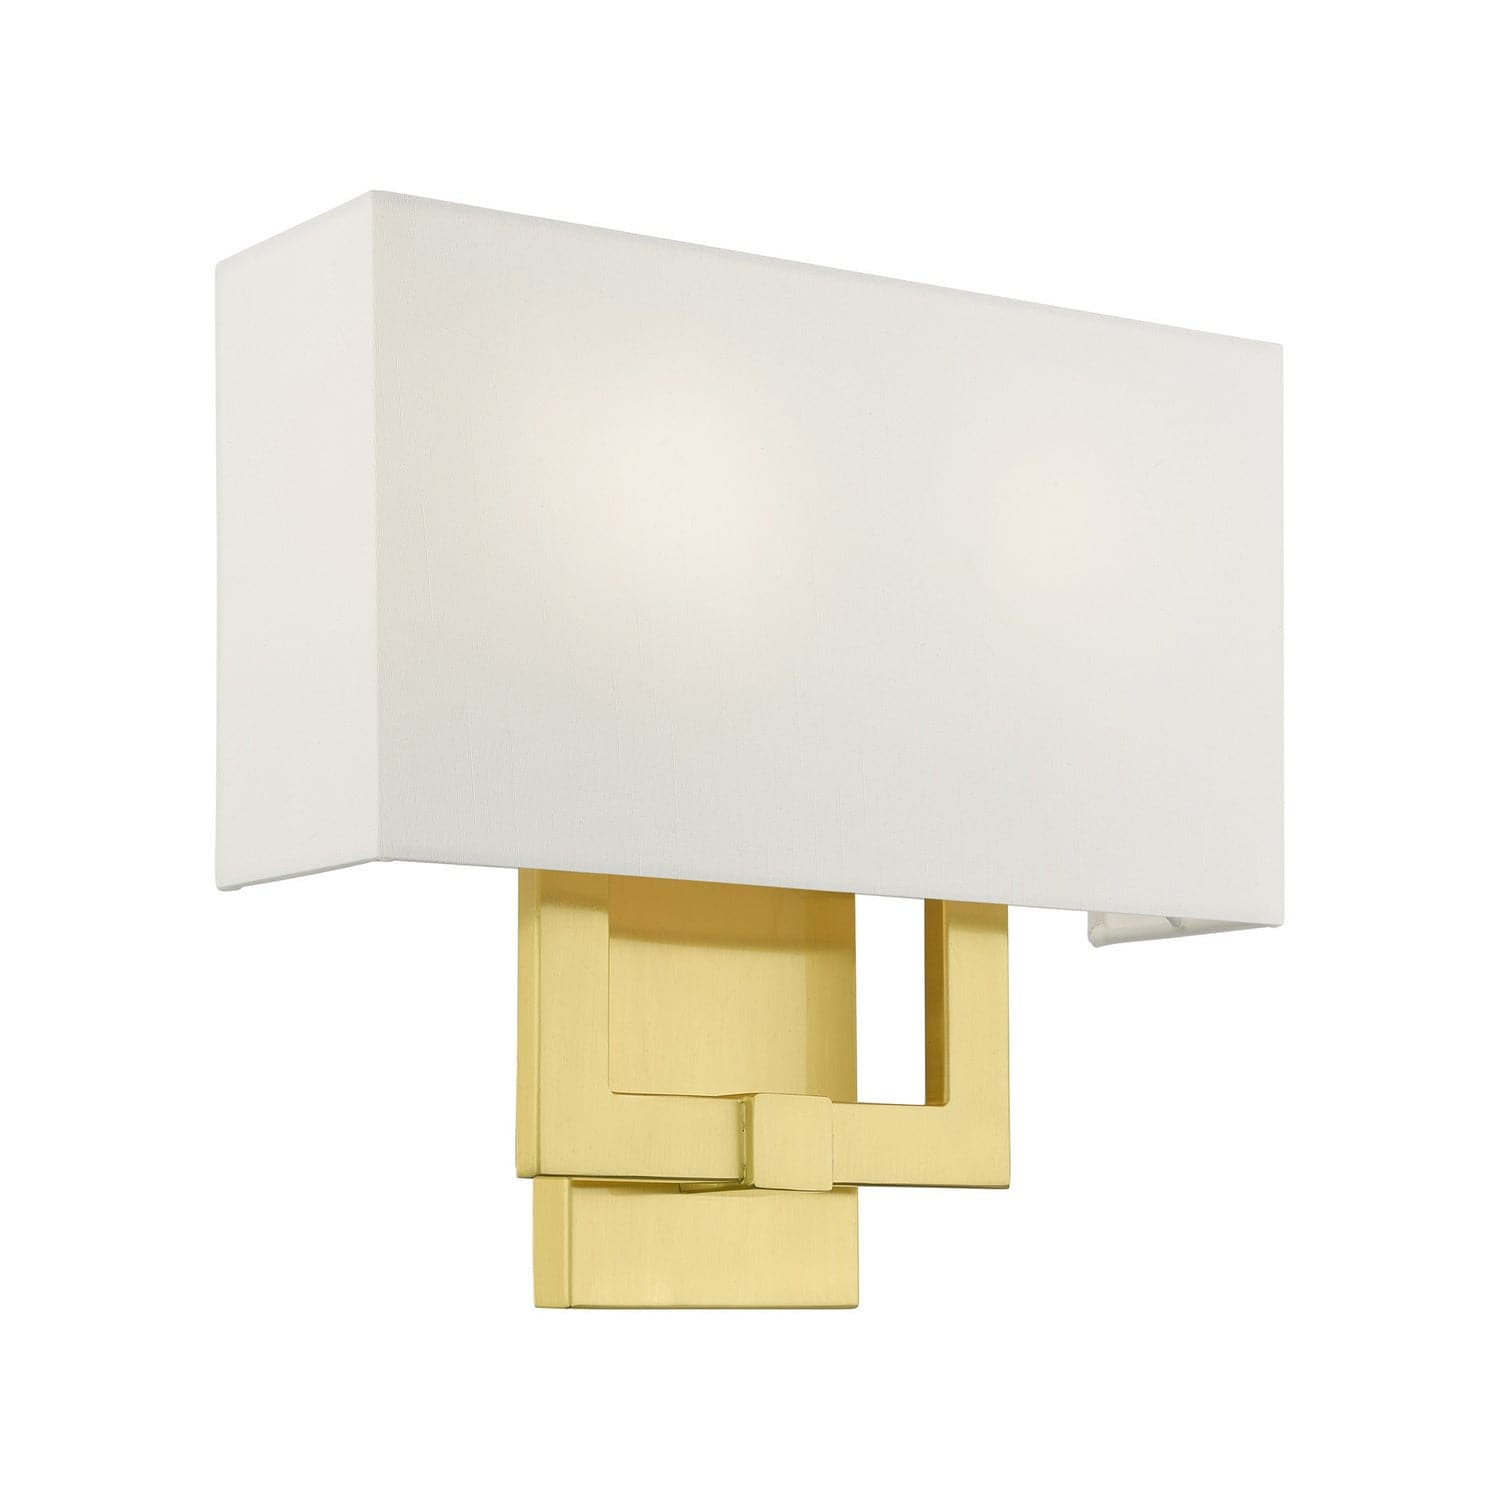 Livex Lighting - 51103-12 - Two Light Wall Sconce - ADA Wall Sconces - Satin Brass